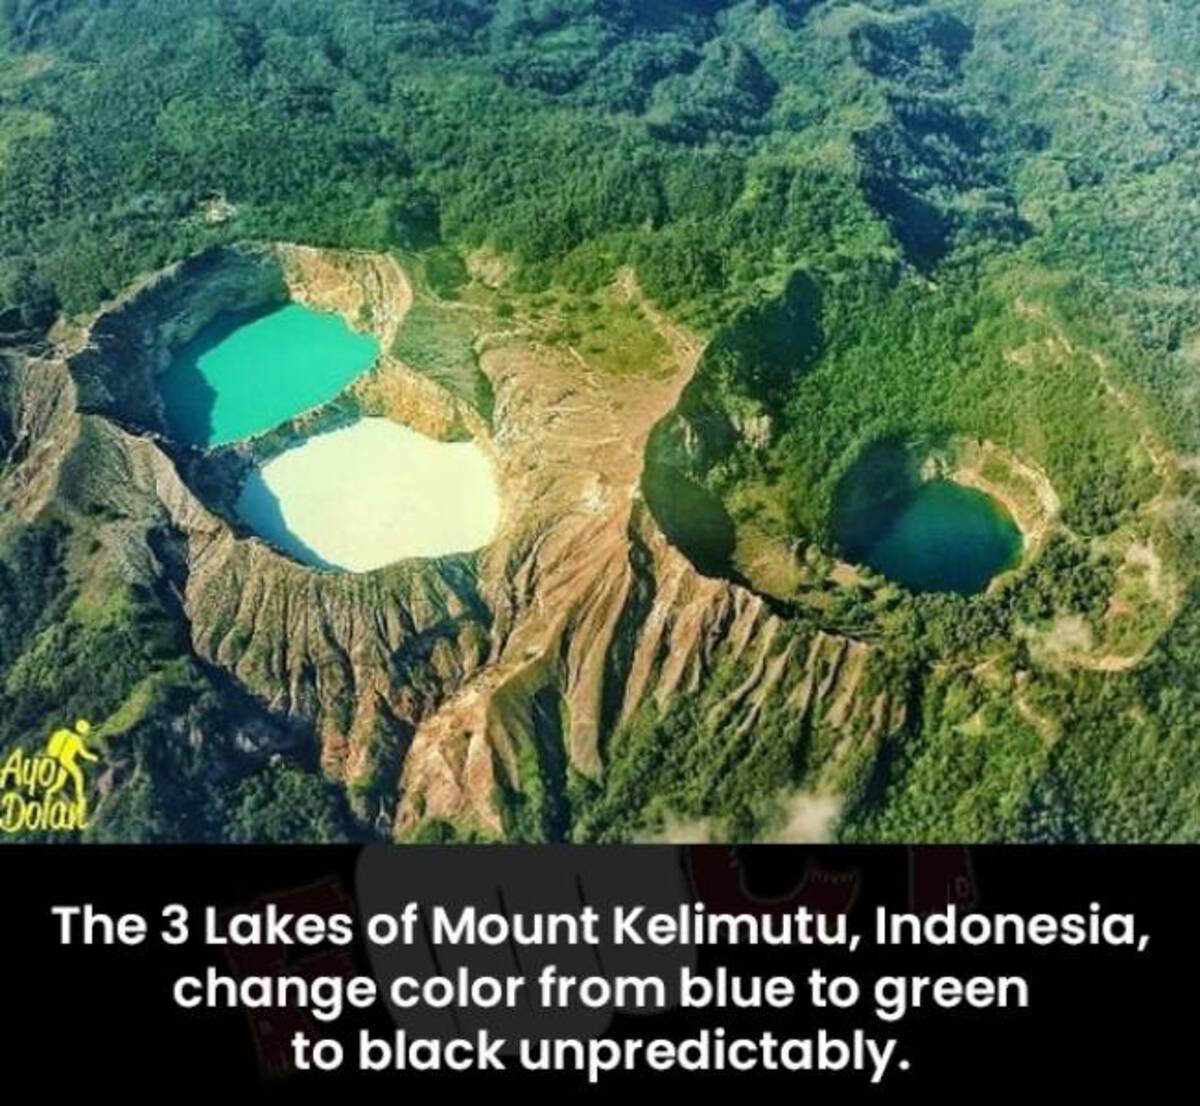 Ayo Dolar The 3 Lakes of Mount Kelimutu, Indonesia, change color from blue to green to black unpredictably.